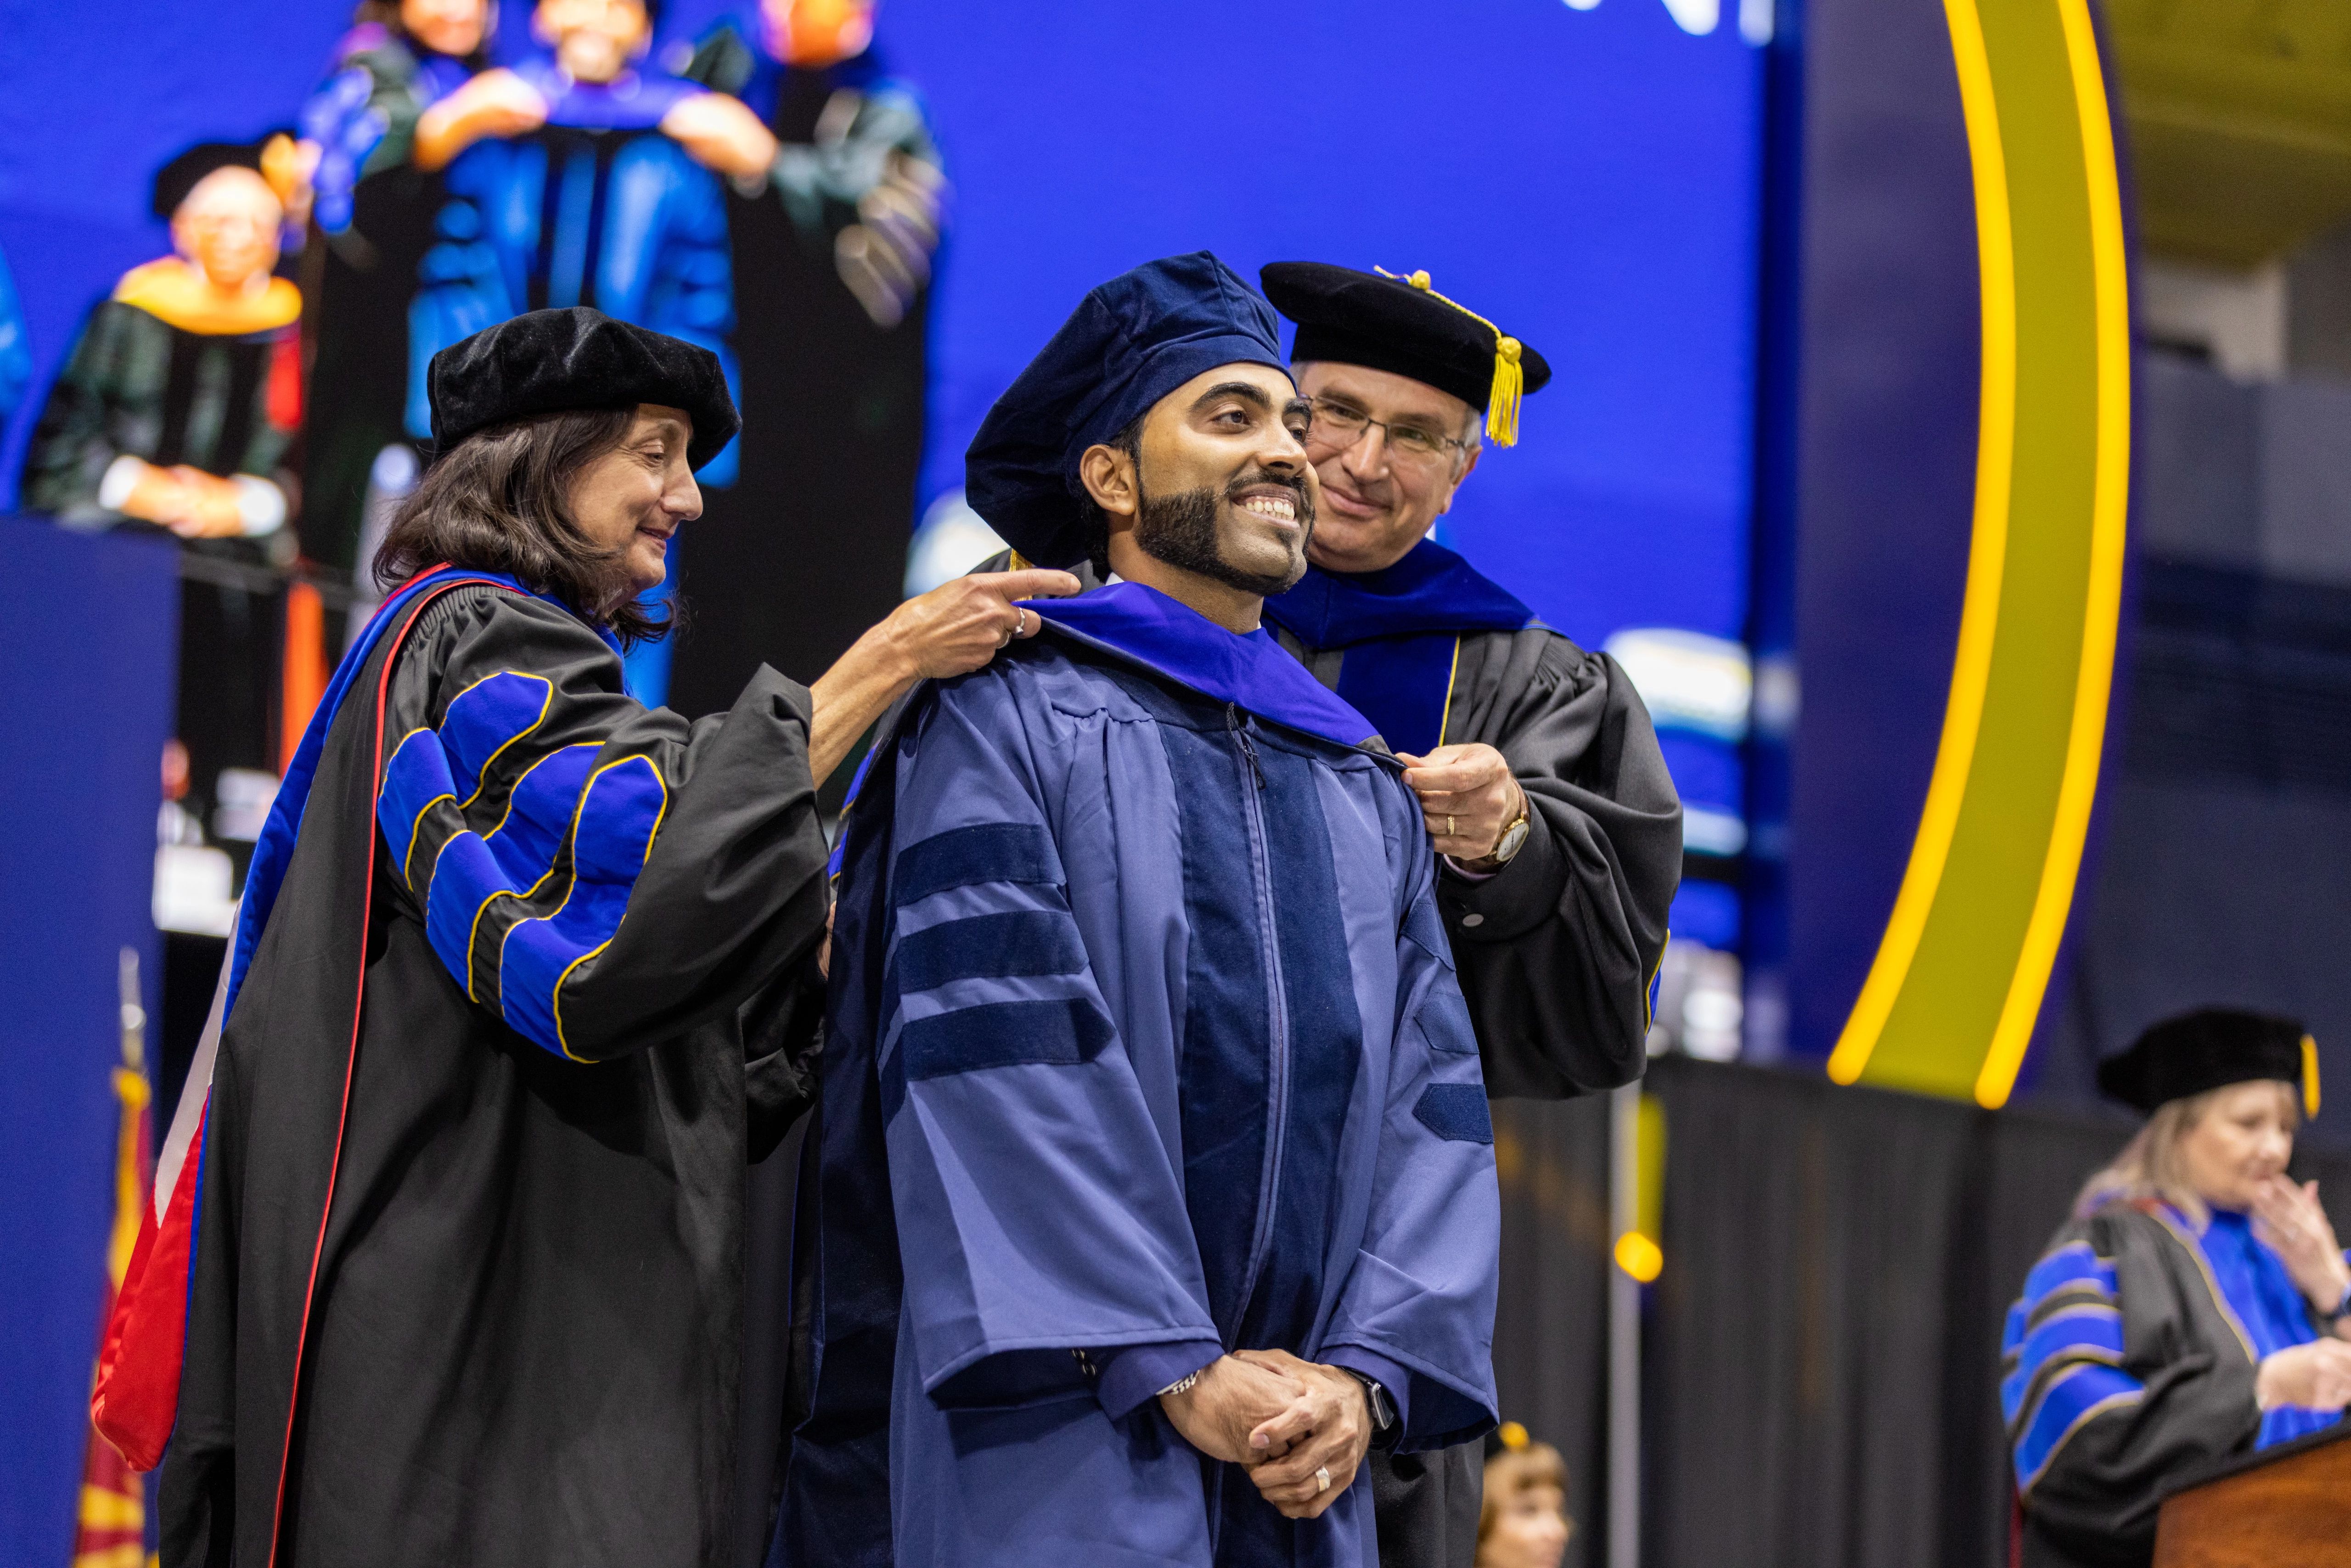 NAU graduate student receives honors during commencement